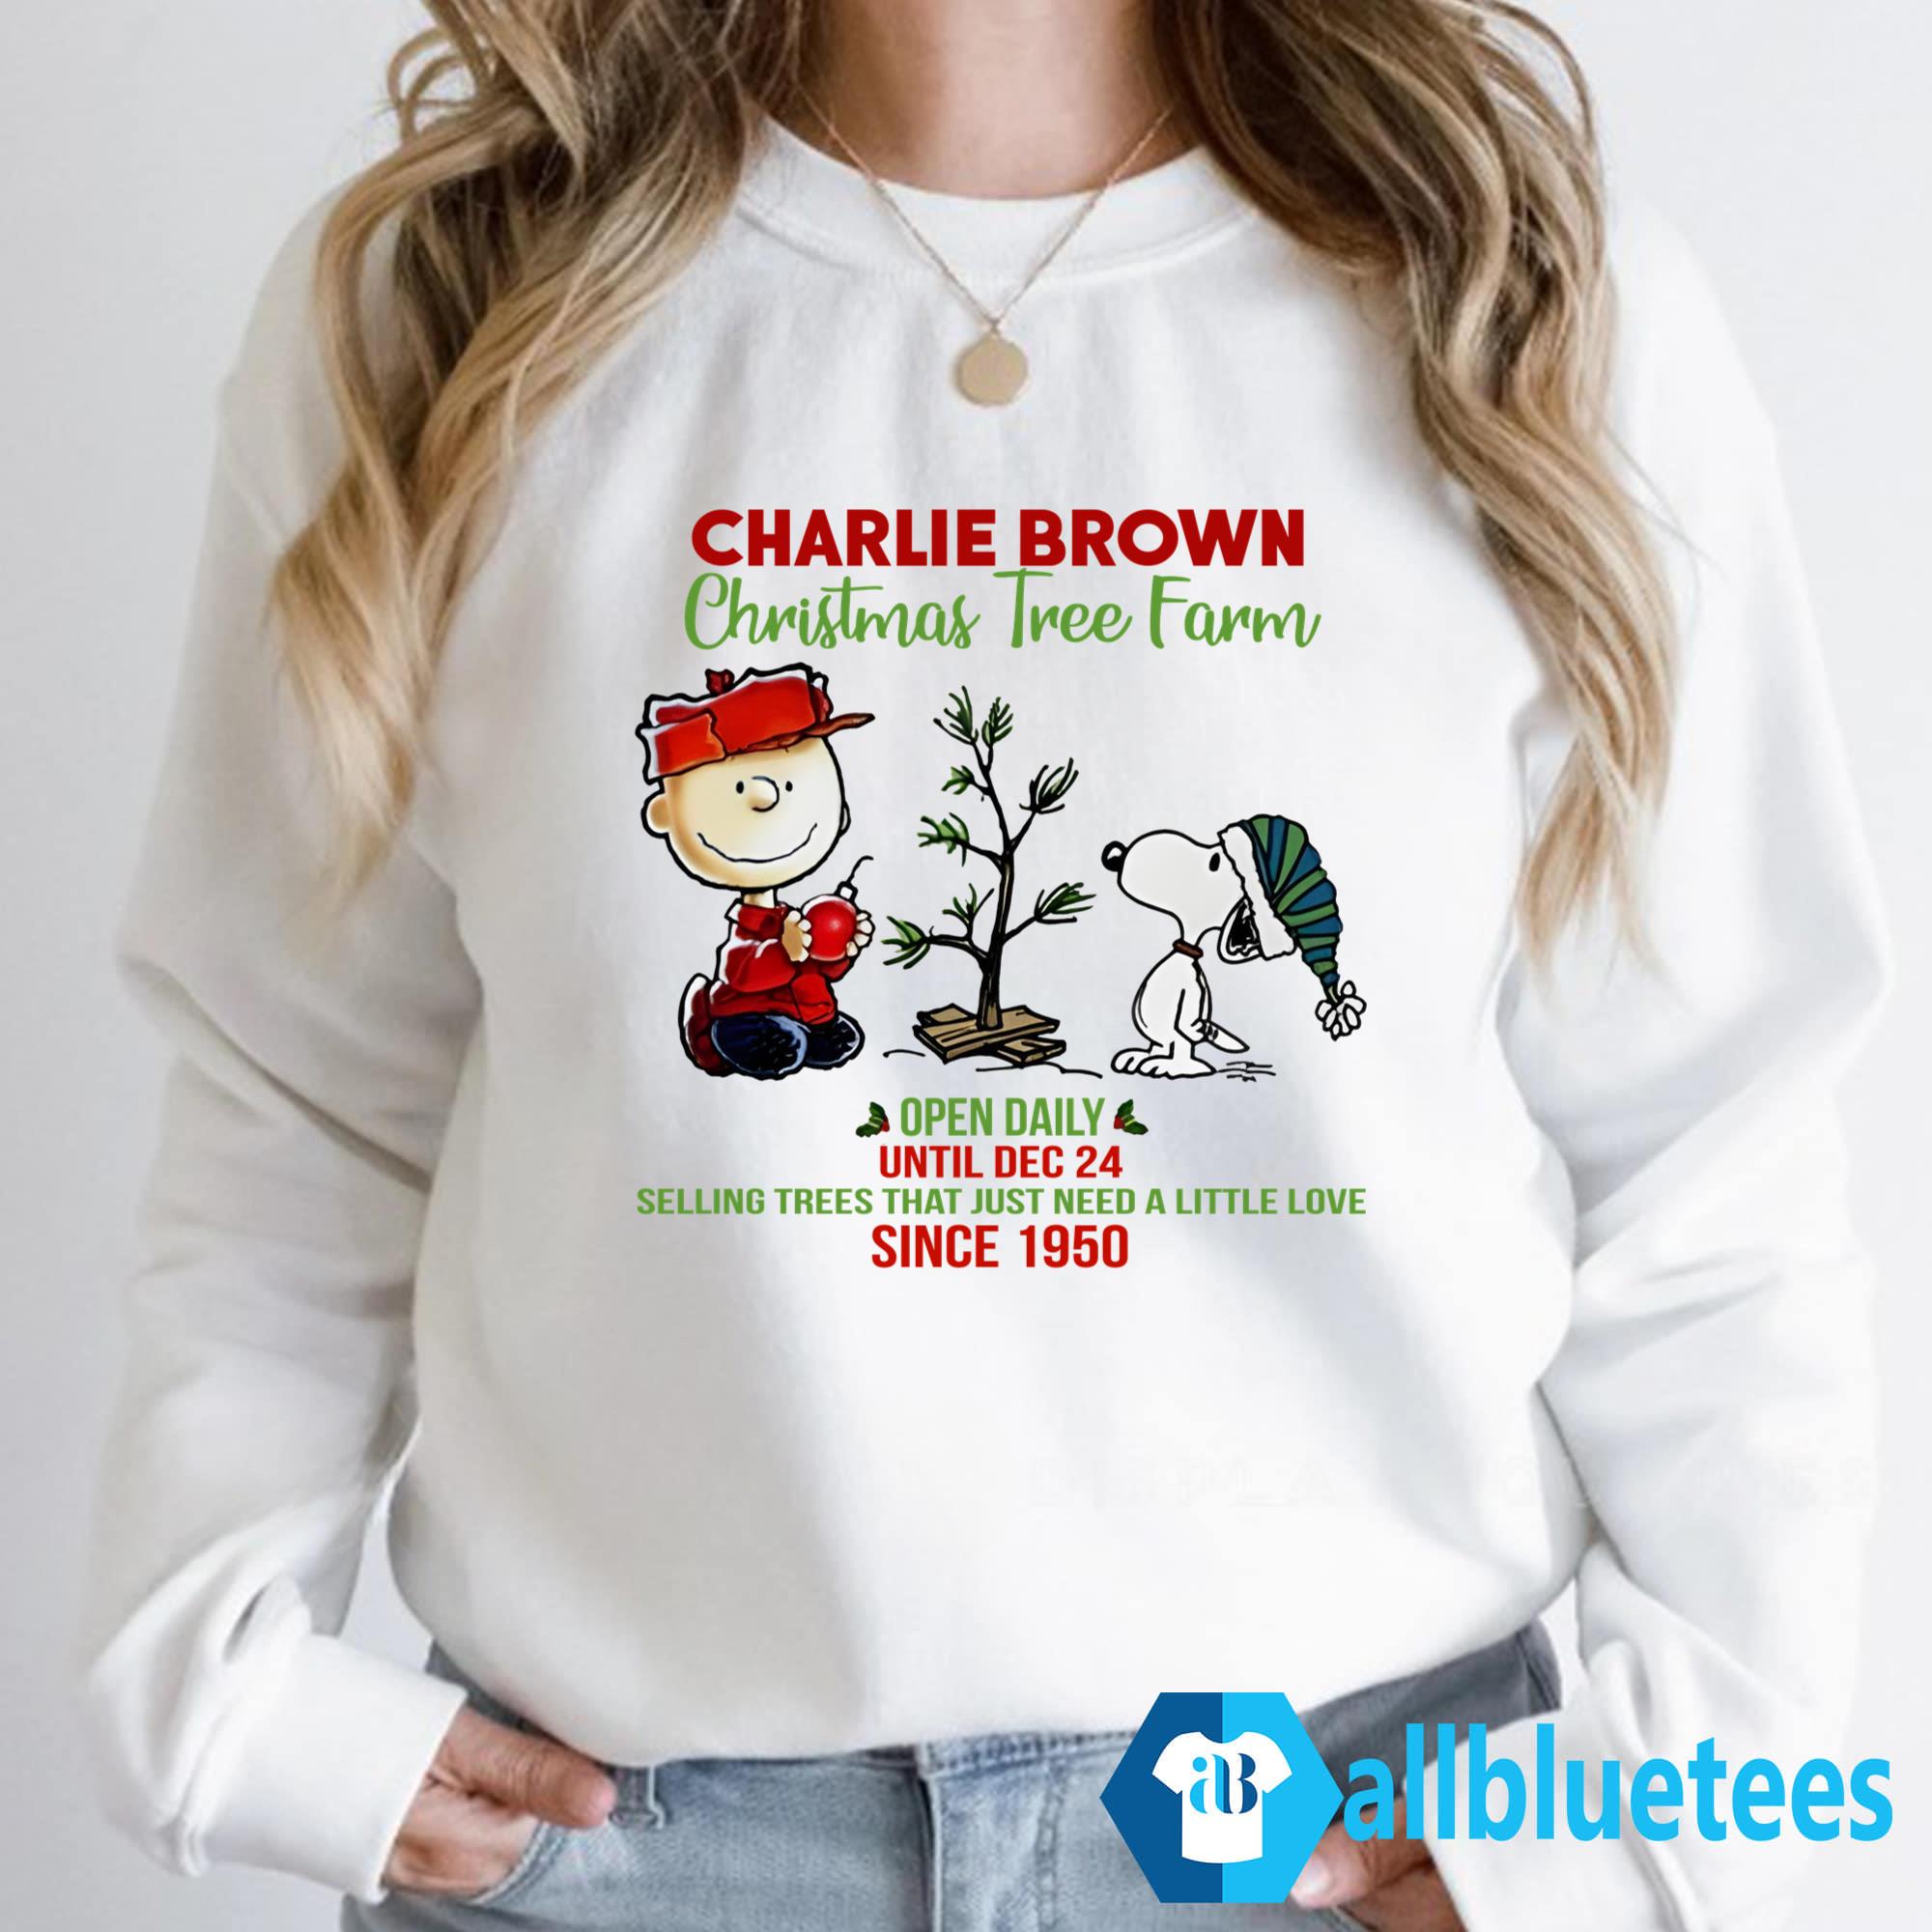 https://allbluetees.com/wp-content/uploads/2023/10/Charlie-Brown-Christmas-Tree-Farm-Open-Daily-Until-Dec-24-Selling-Since-1950-Shirt_Sweatshirt_White-z66.jpg